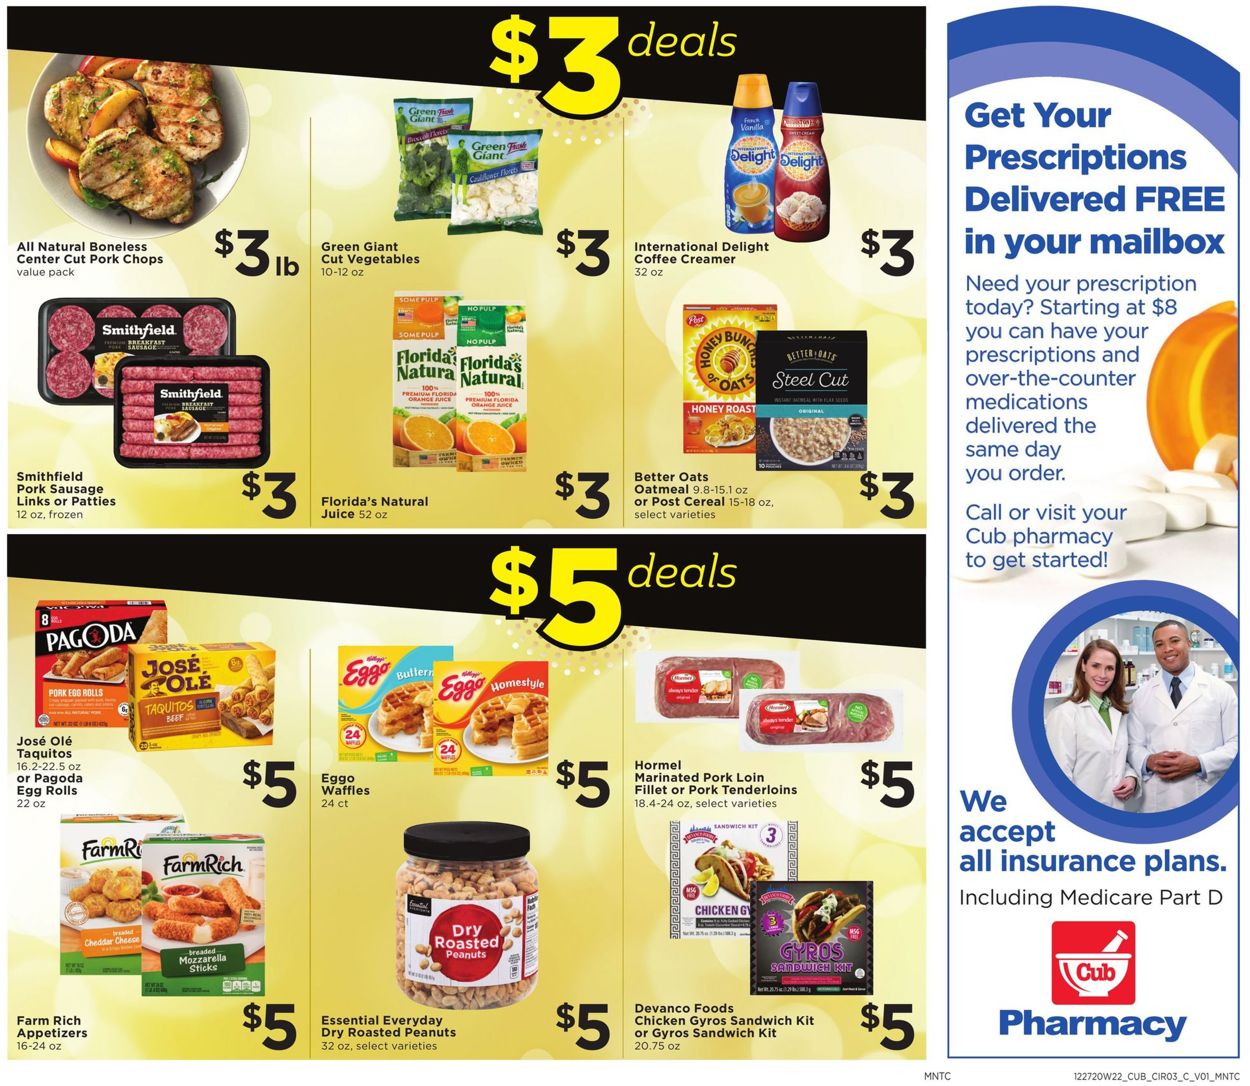 Catalogue Cub Foods Grocery Savings from 12/27/2020